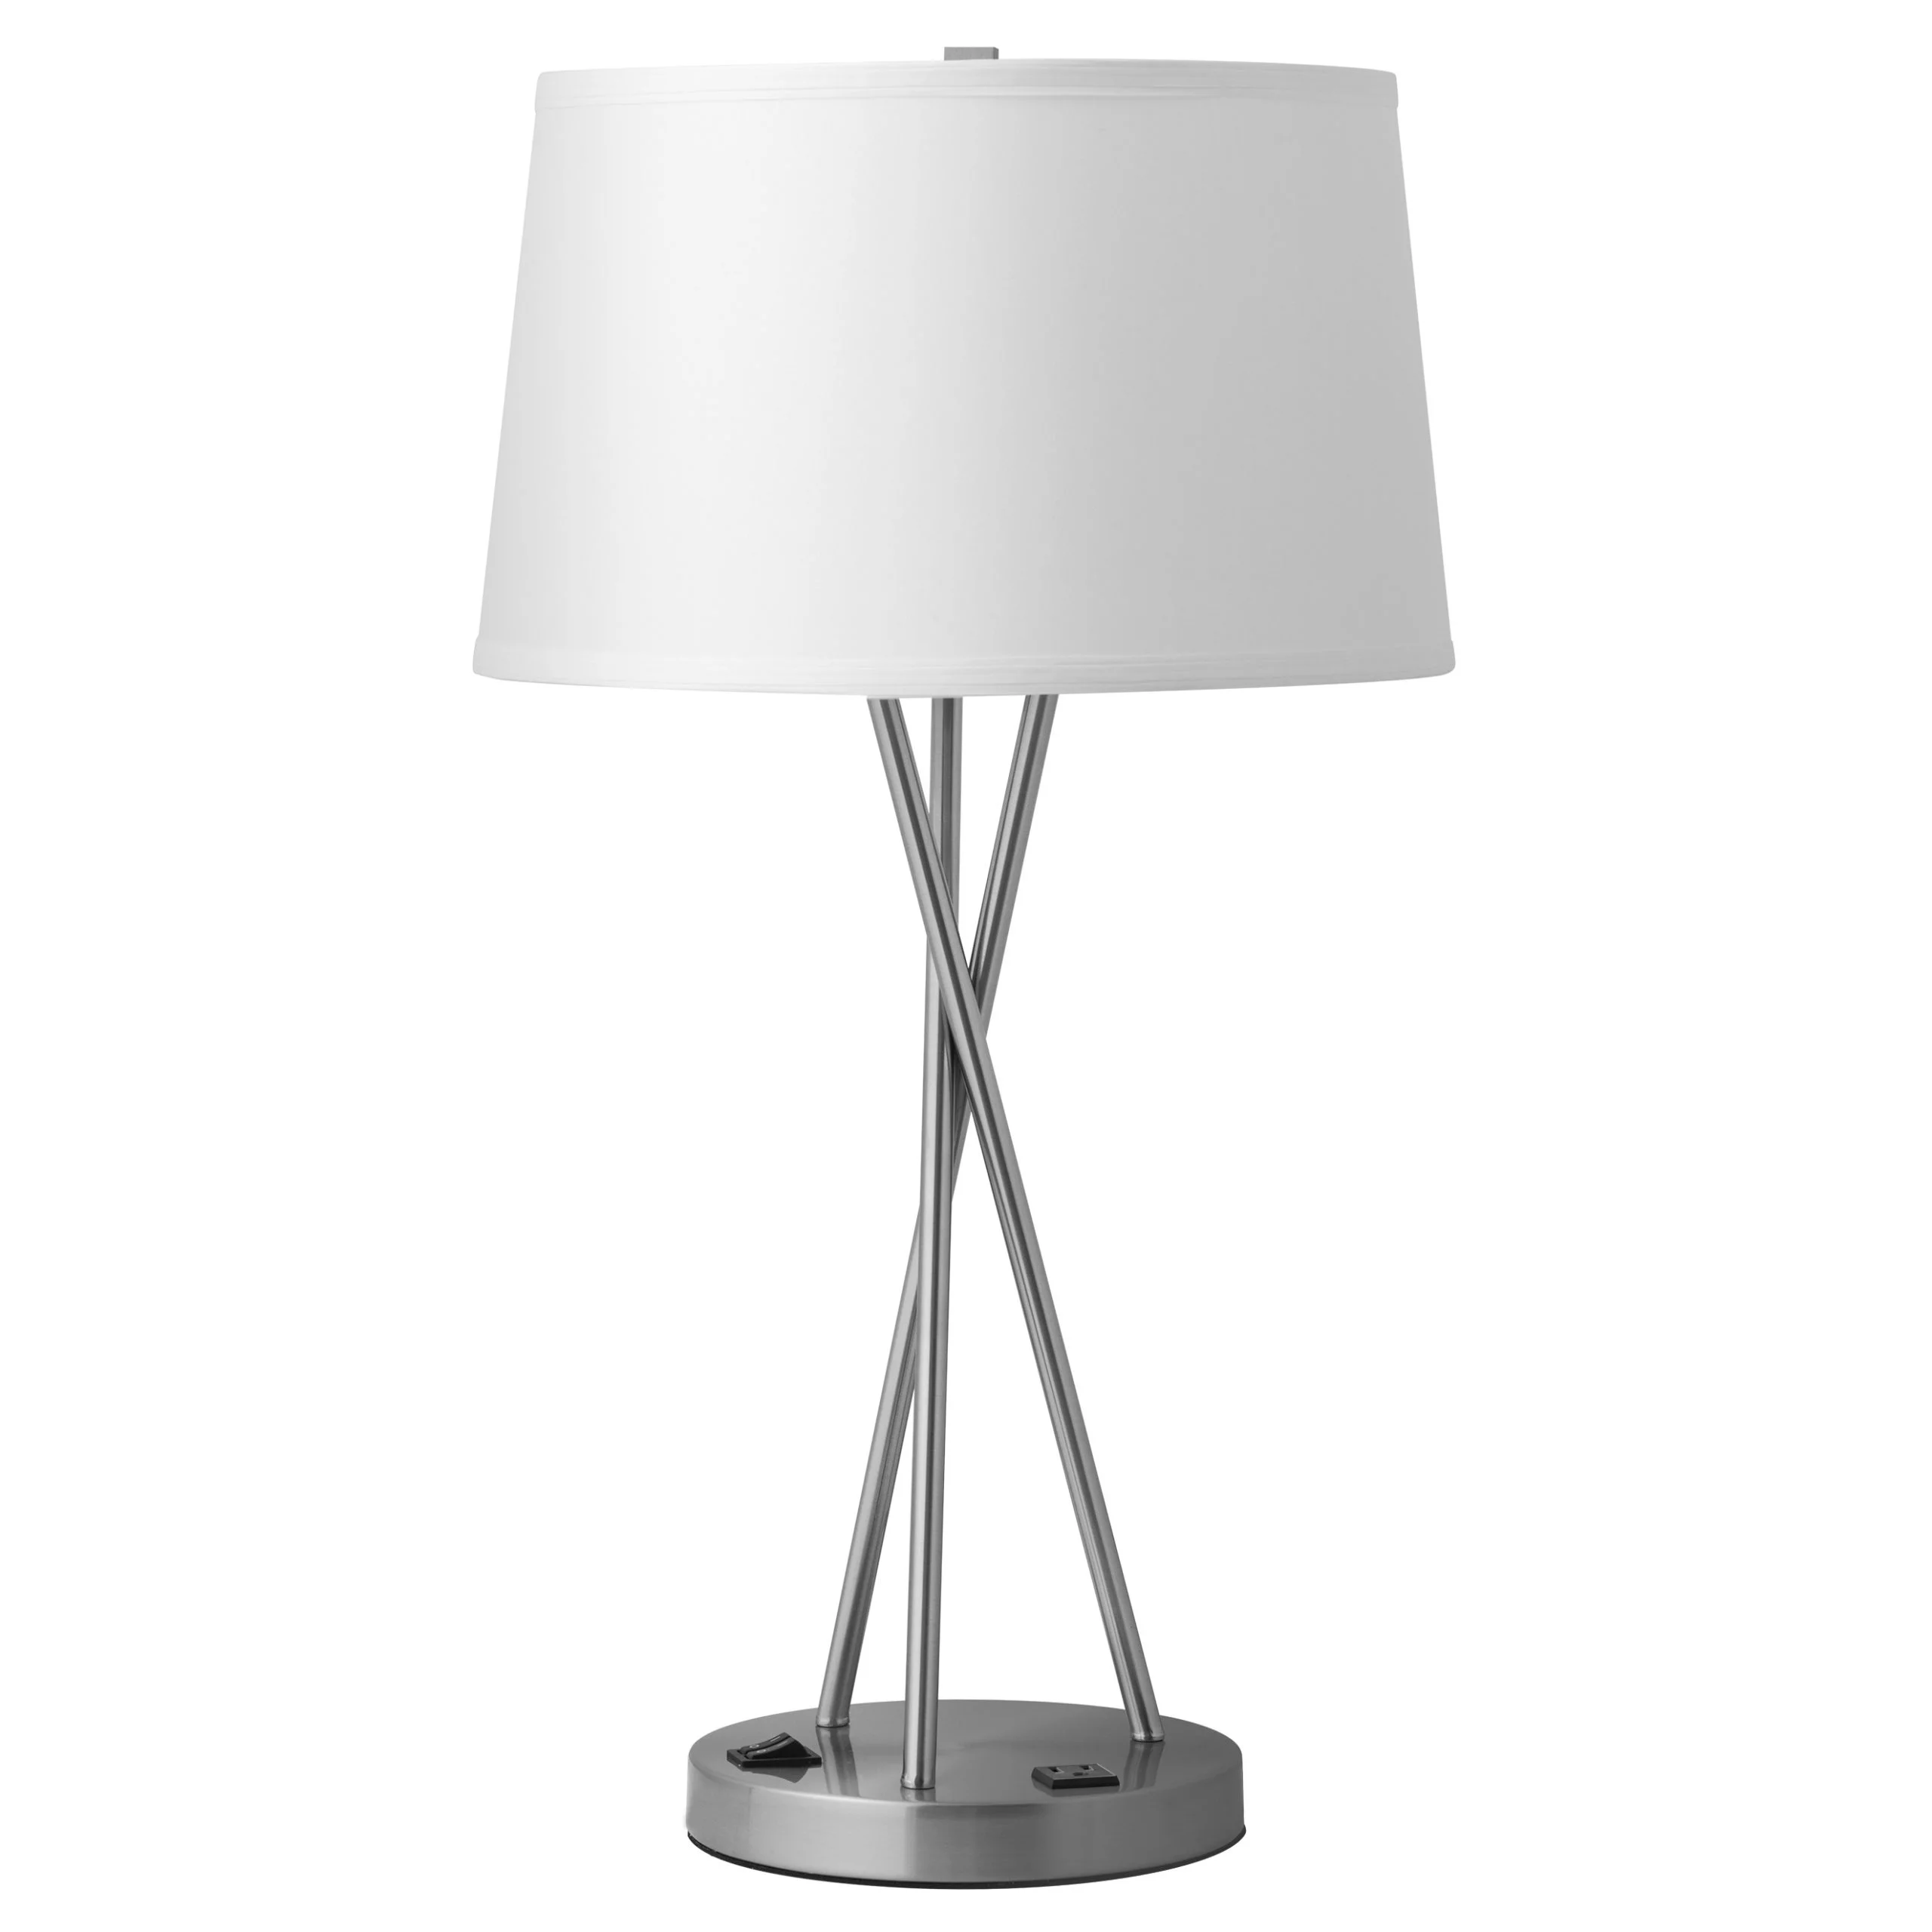 Breeze Single Table Lamp with 1 Outlet